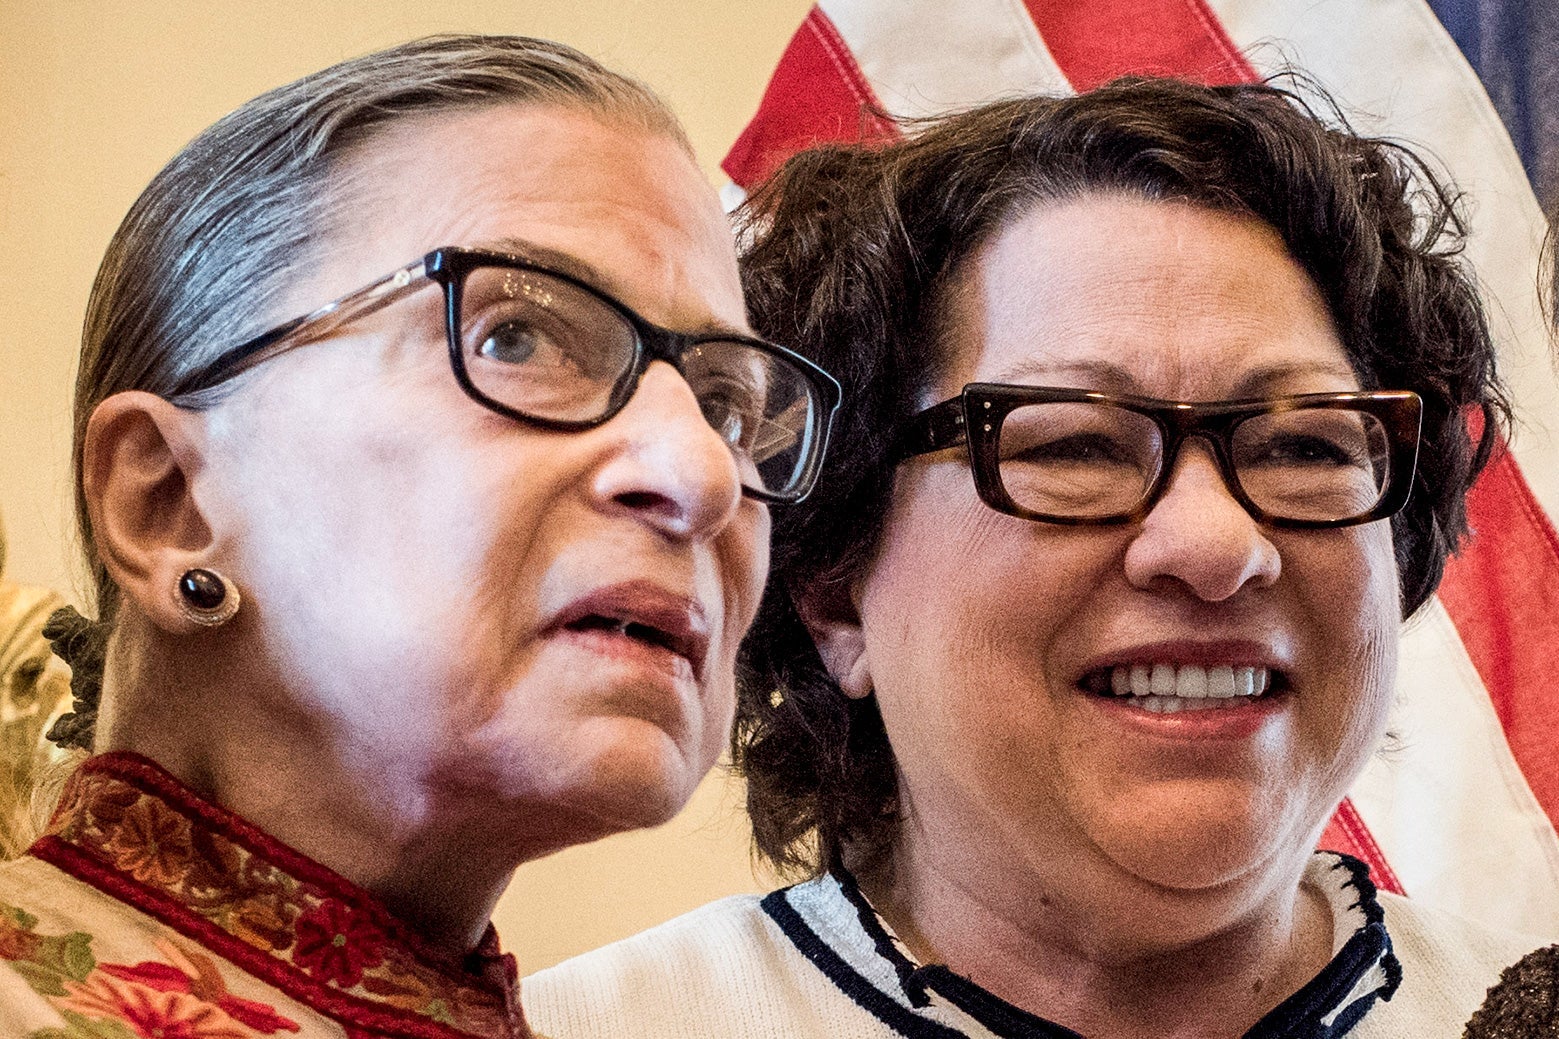 Sotomayor smiles next to Ginsburg, with an American flag in the background.